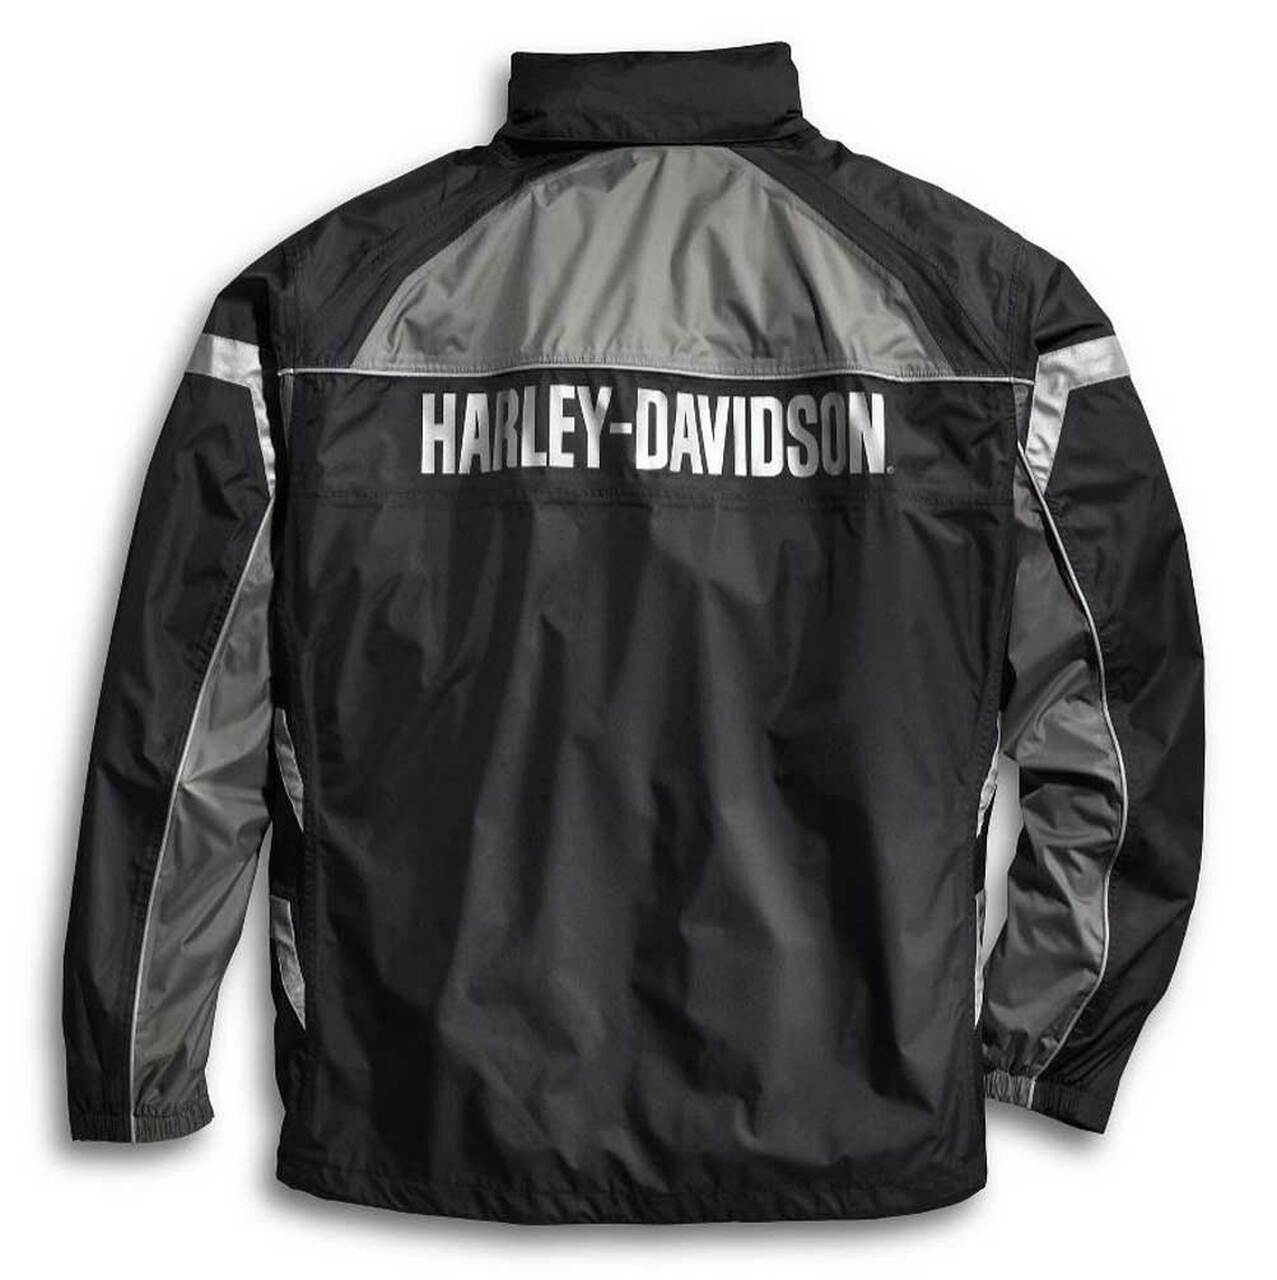 Harley-Davidson® Rain Suit, Full Speed Winged B&S Reflective Suit